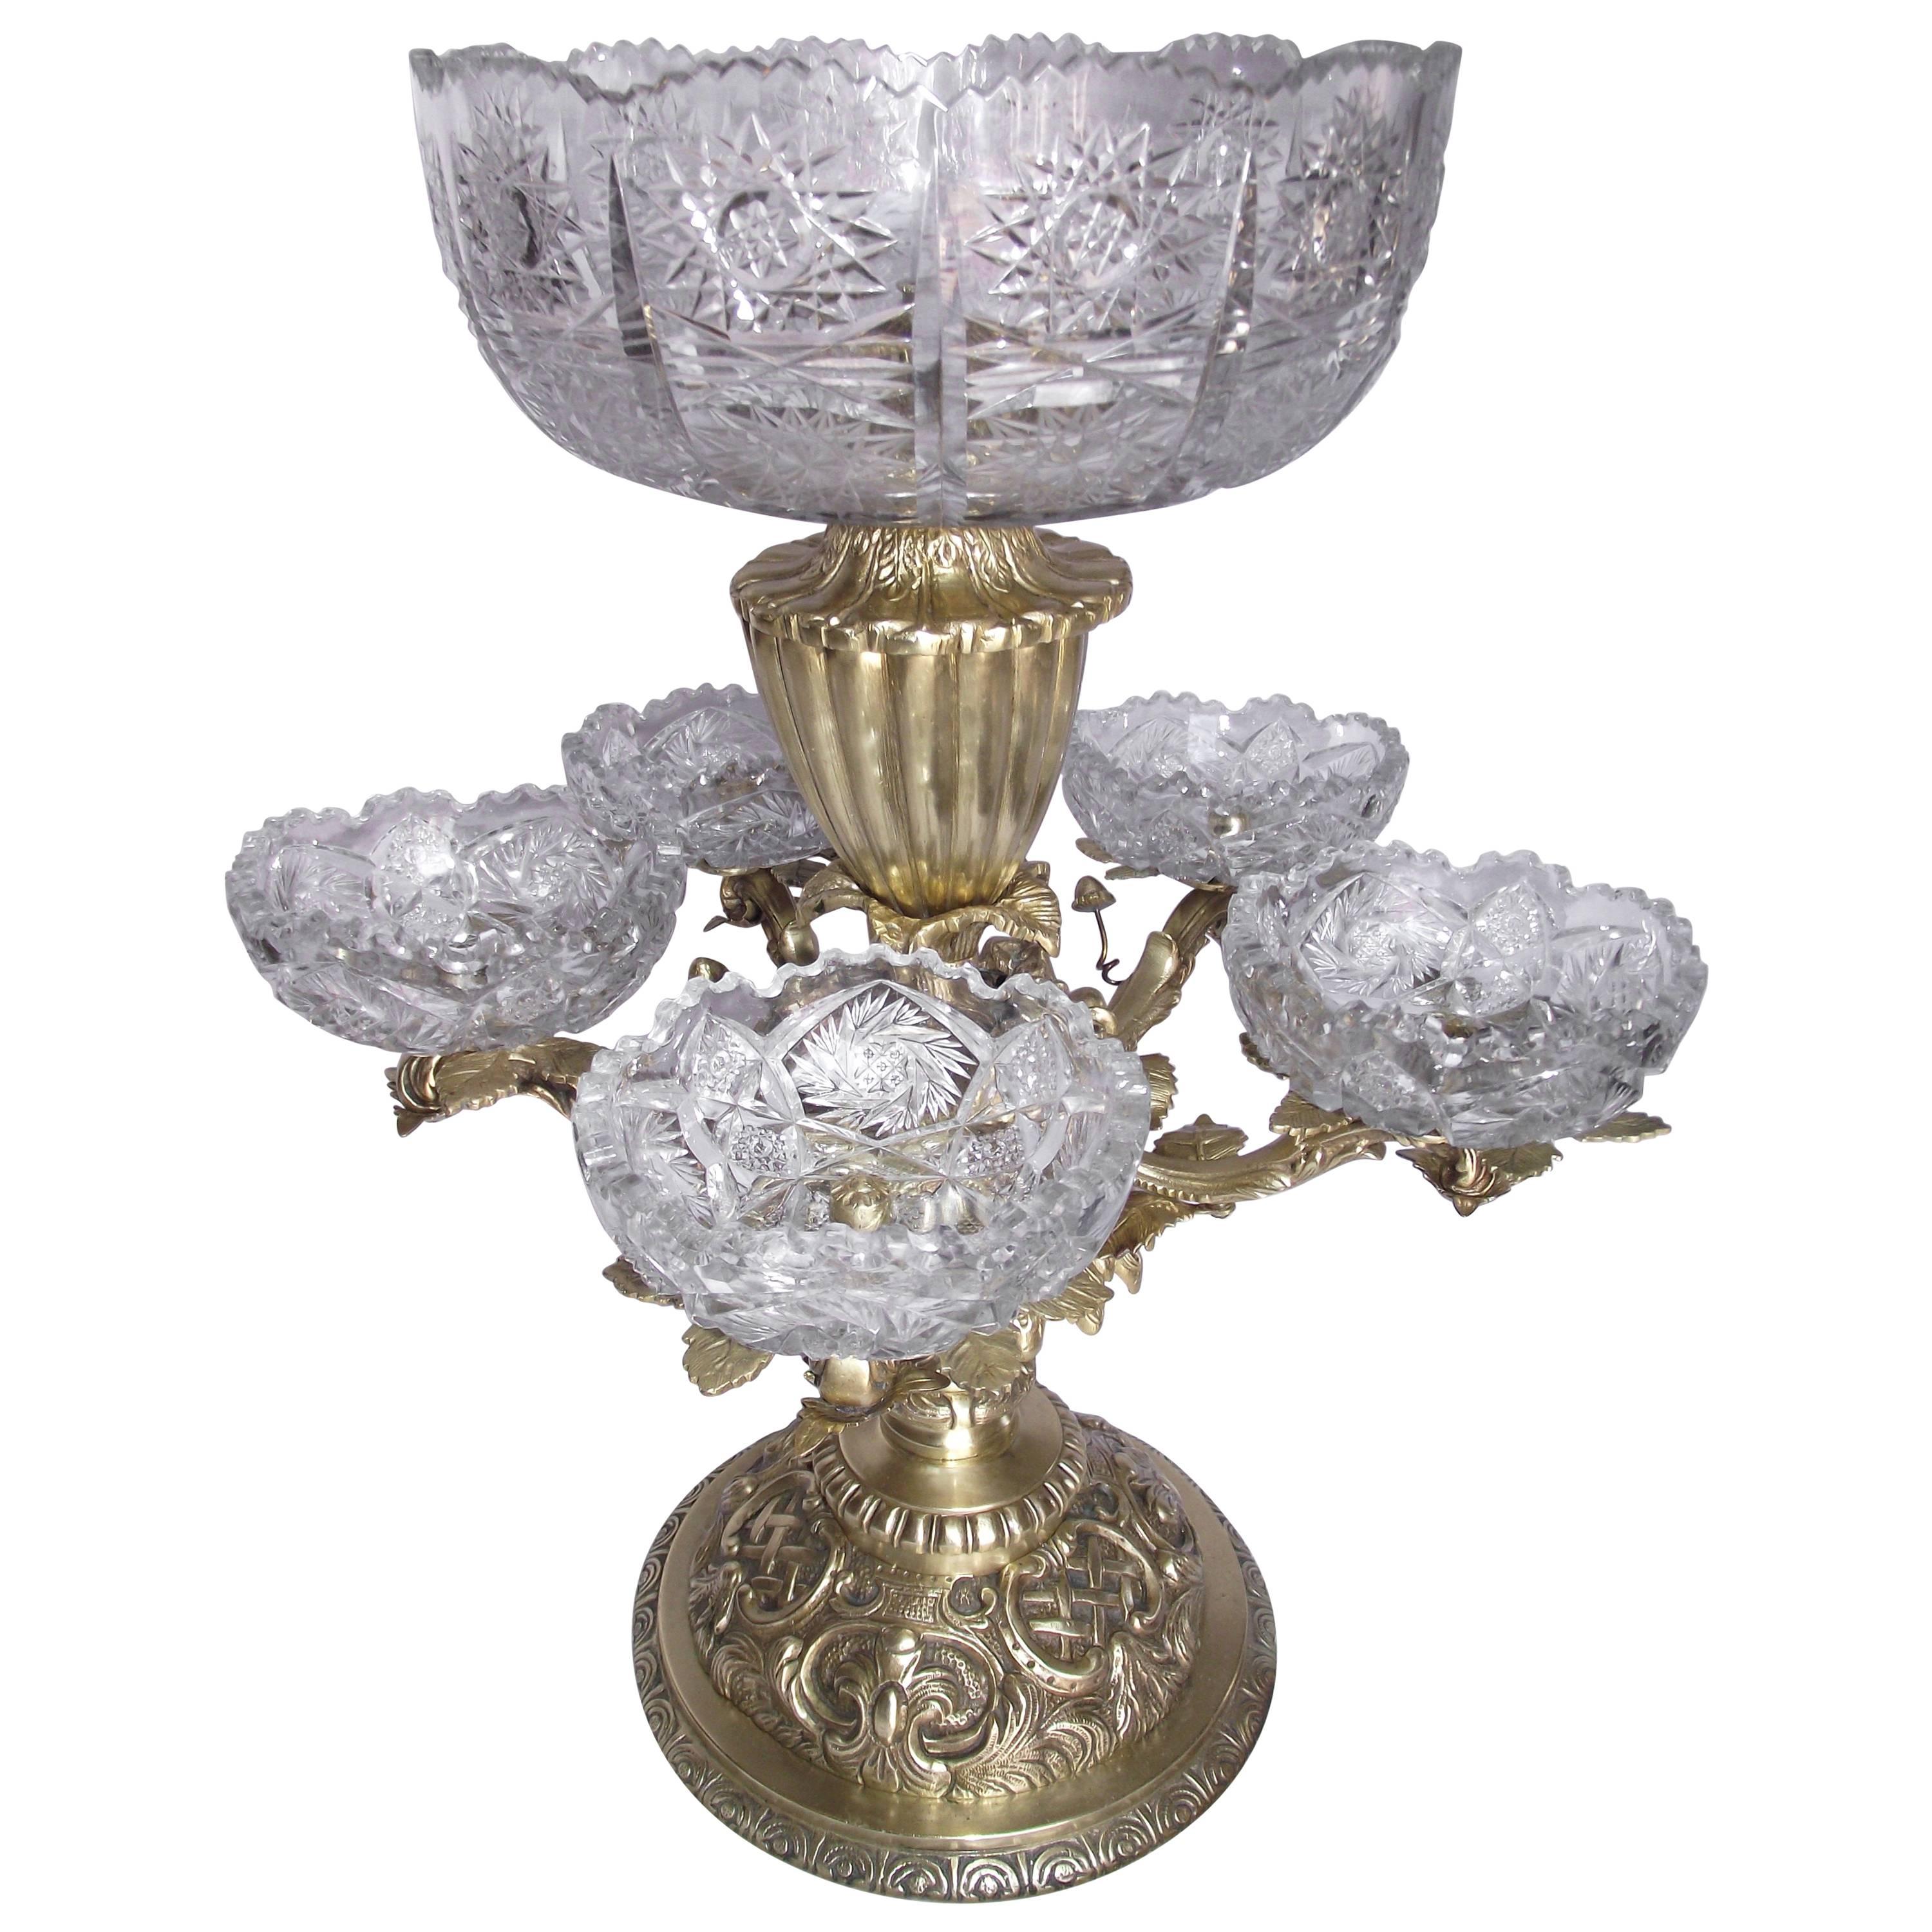 Victorian Epergne Centrepiece, Brass and Glass Centrepiece for Fruit or Flowers